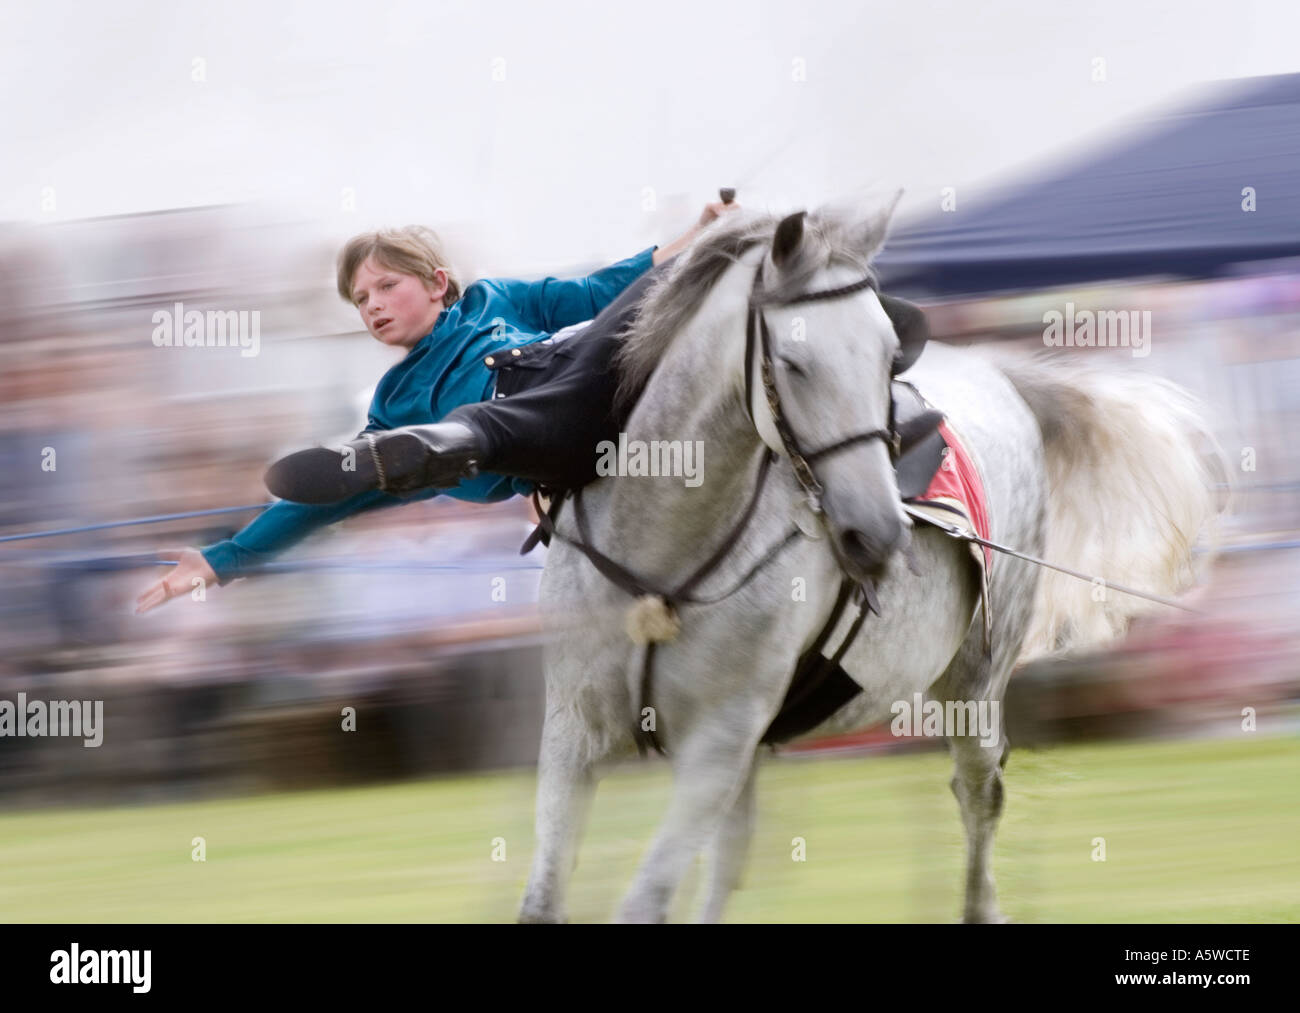 Boy in Cossack costume showing off his horsemanship at country show Stock Photo